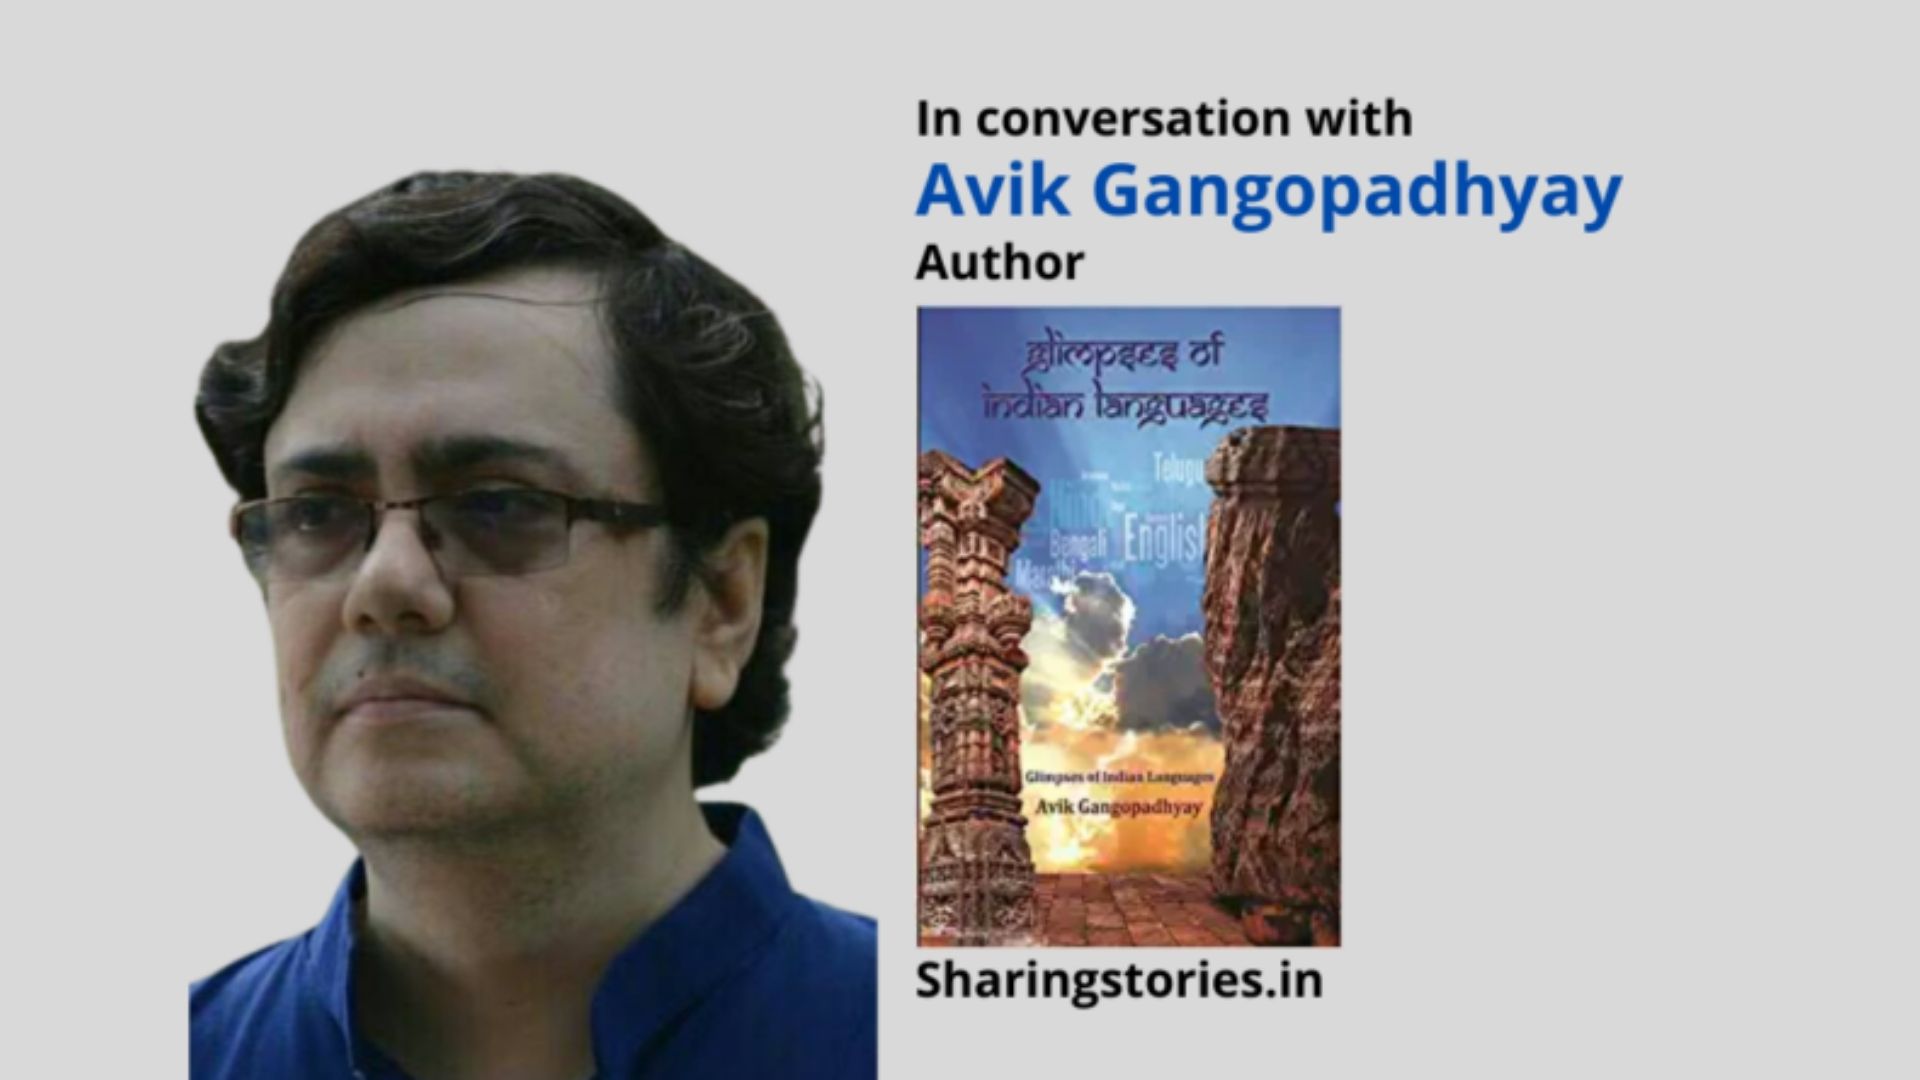 Glimpses Of Indian Languages by Avik Gangopadhyay